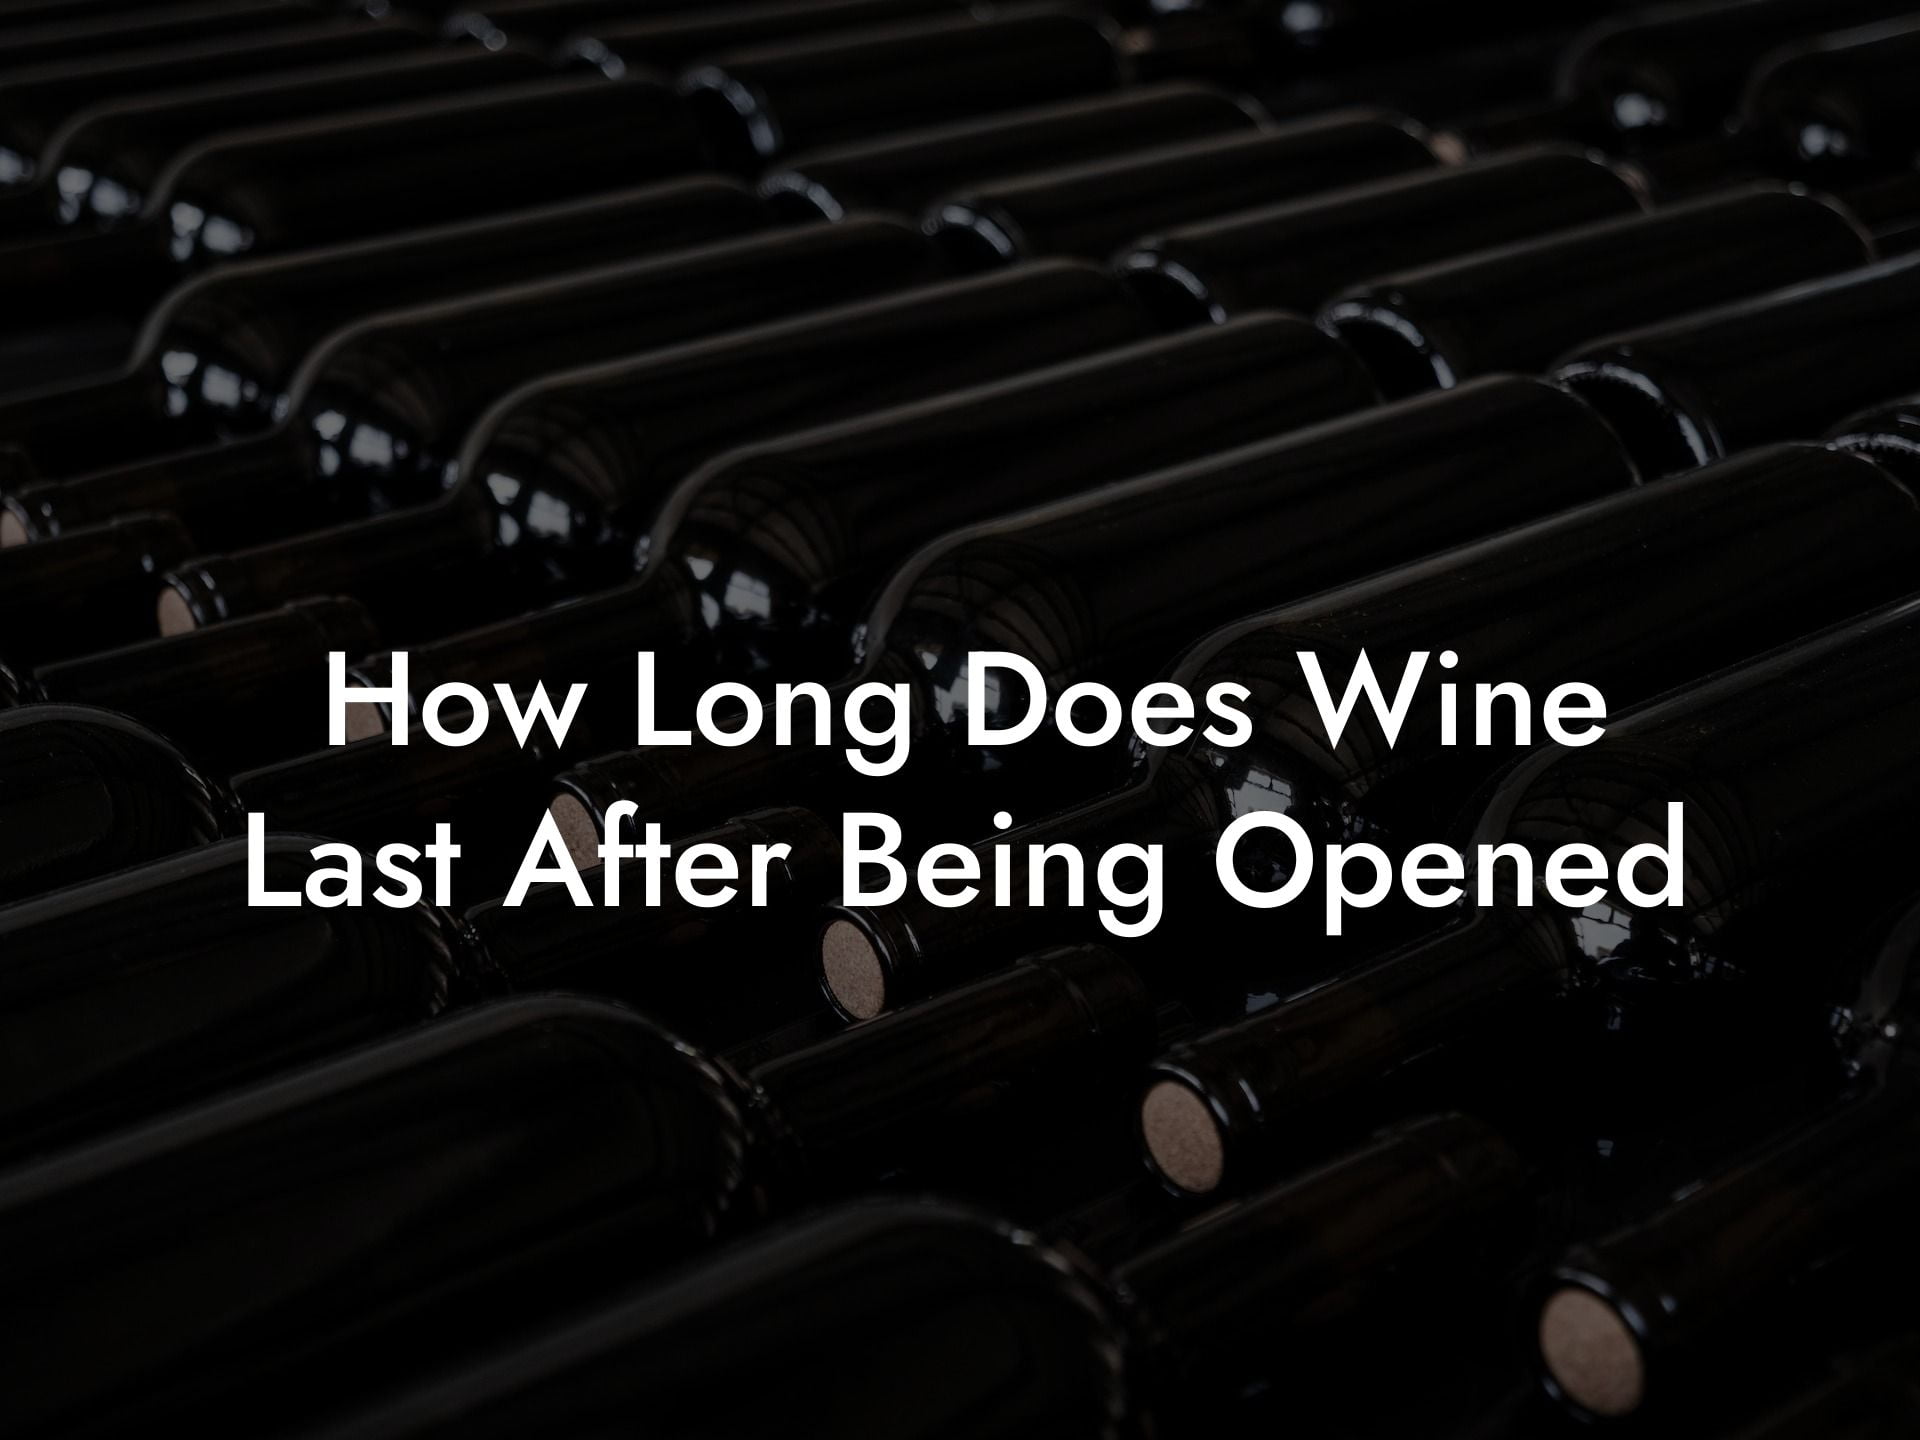 How Long Does Wine Last After Being Opened